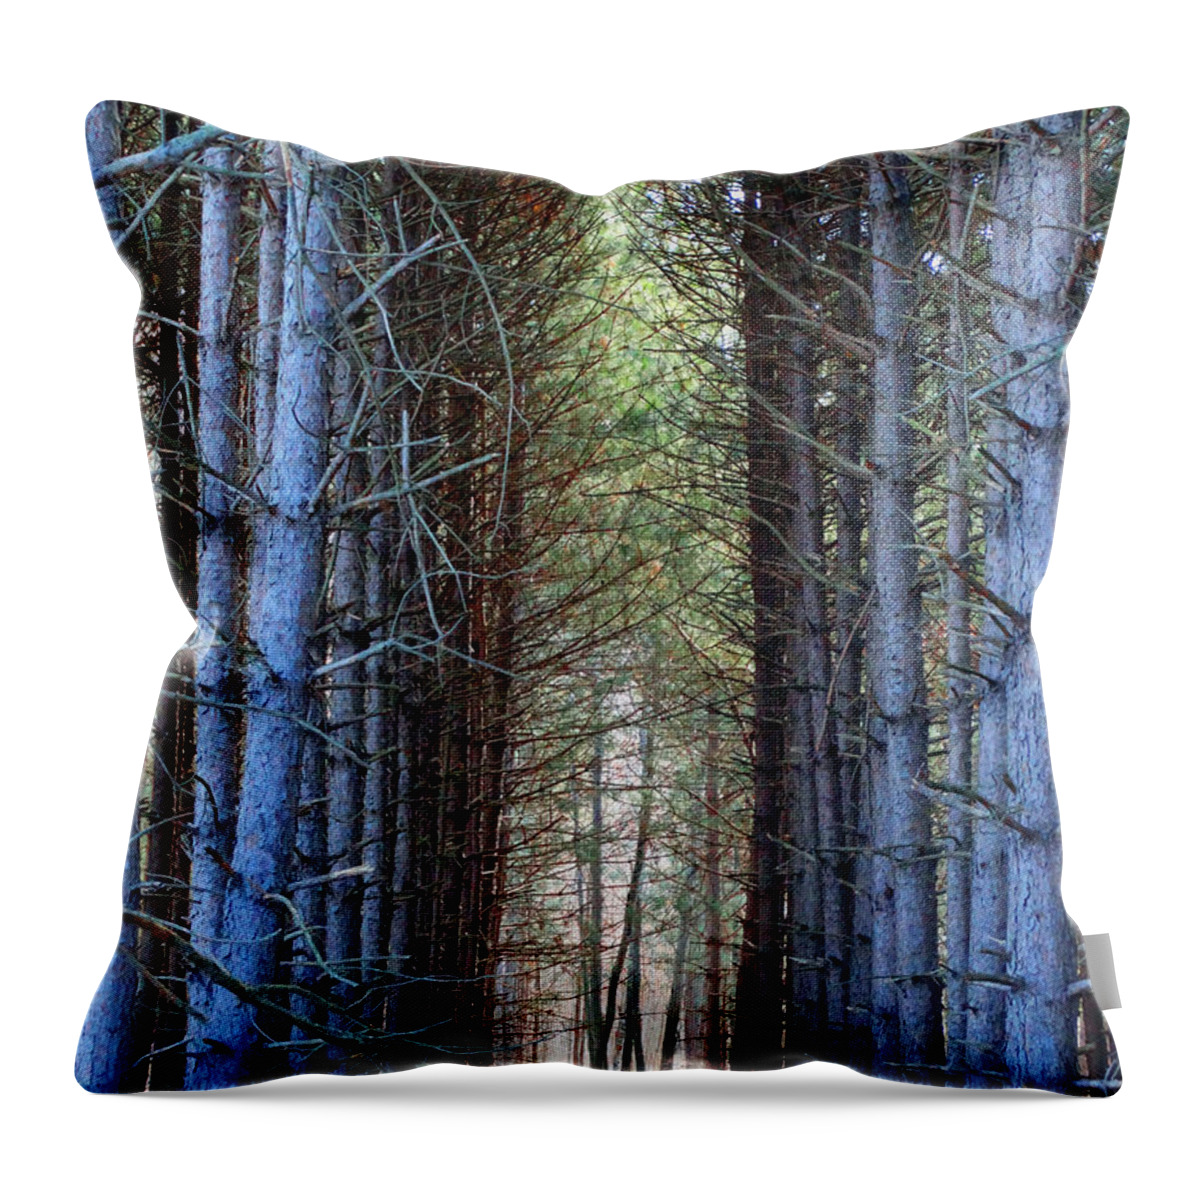 Pines Throw Pillow featuring the photograph Cathedral of Pines by David T Wilkinson